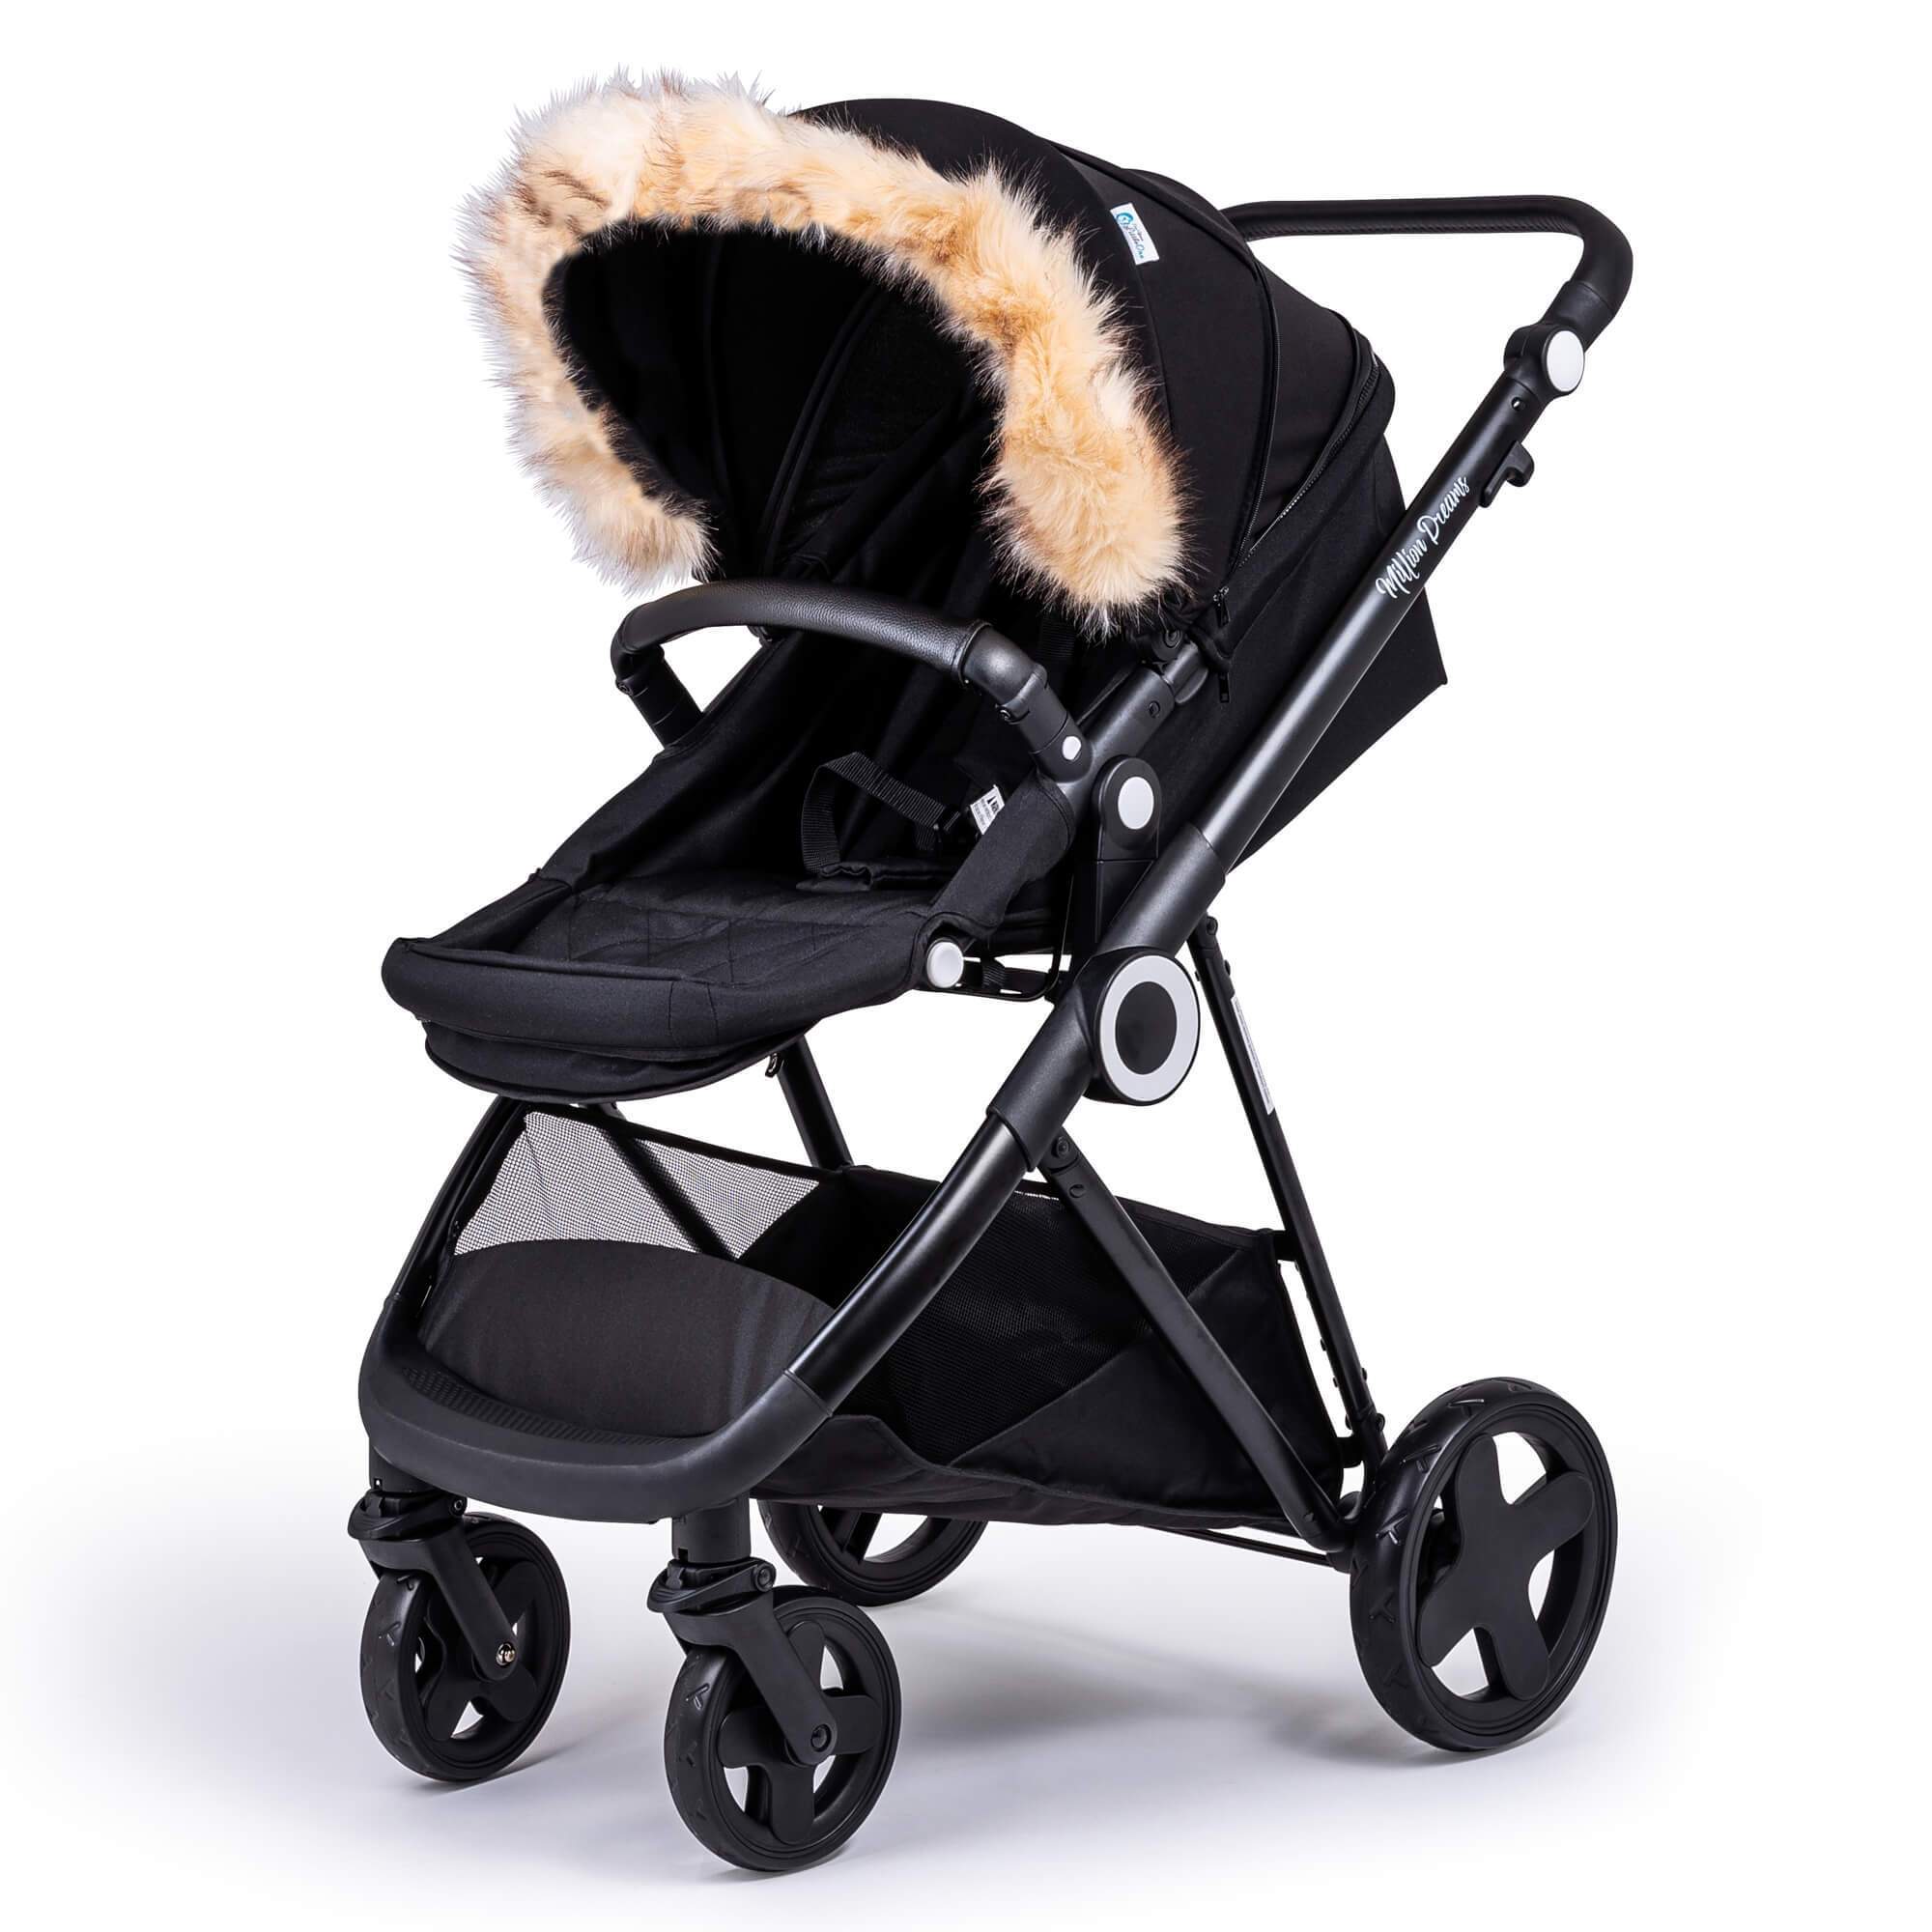 Pram Fur Hood Trim Attachment for Pushchair Compatible with Bebecar - For Your Little One